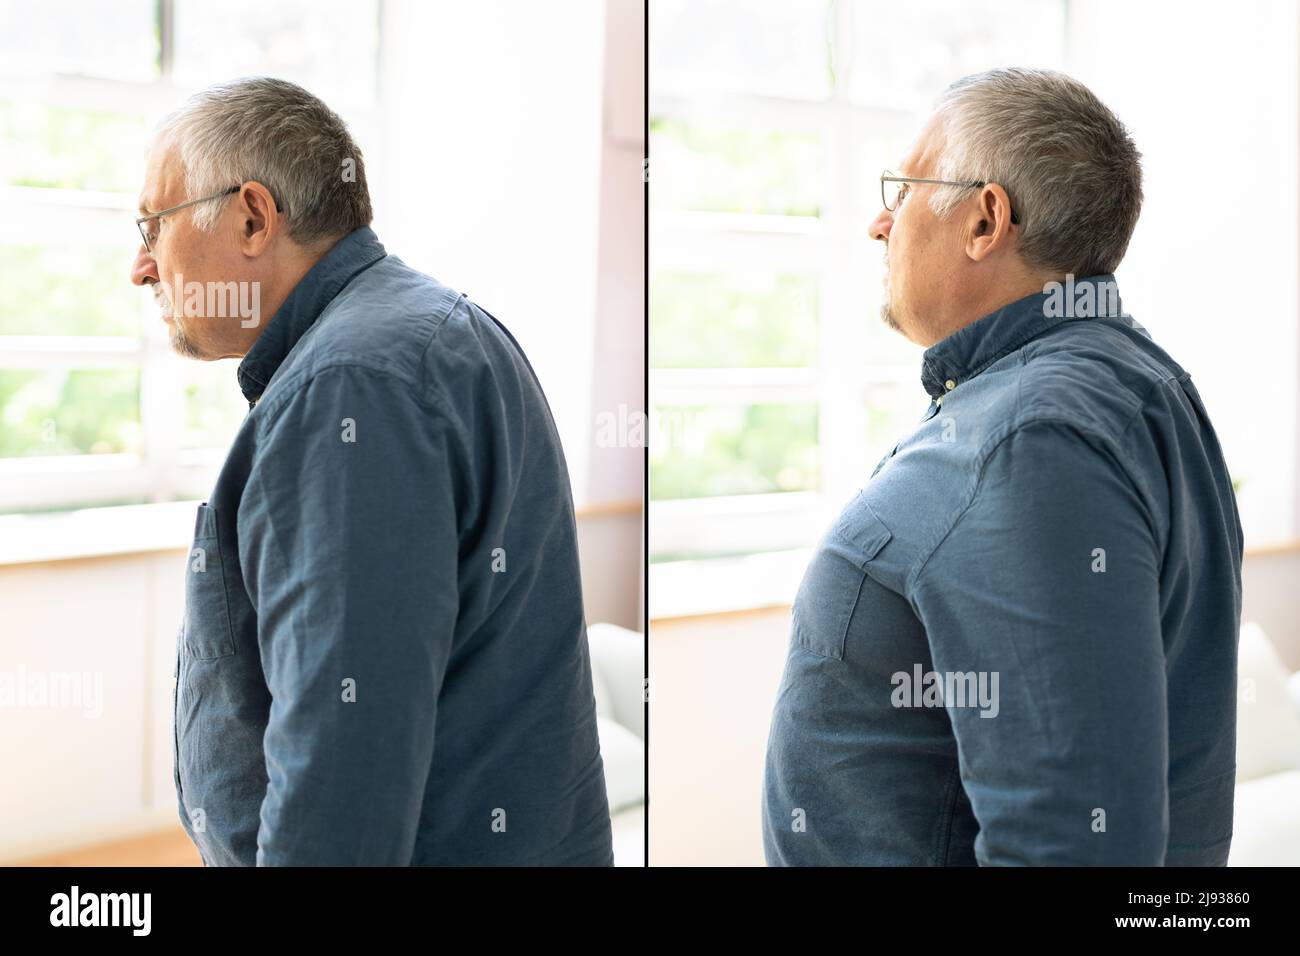 Man With Lordosis And Normal Curvature Against Gray Background Stock Photo